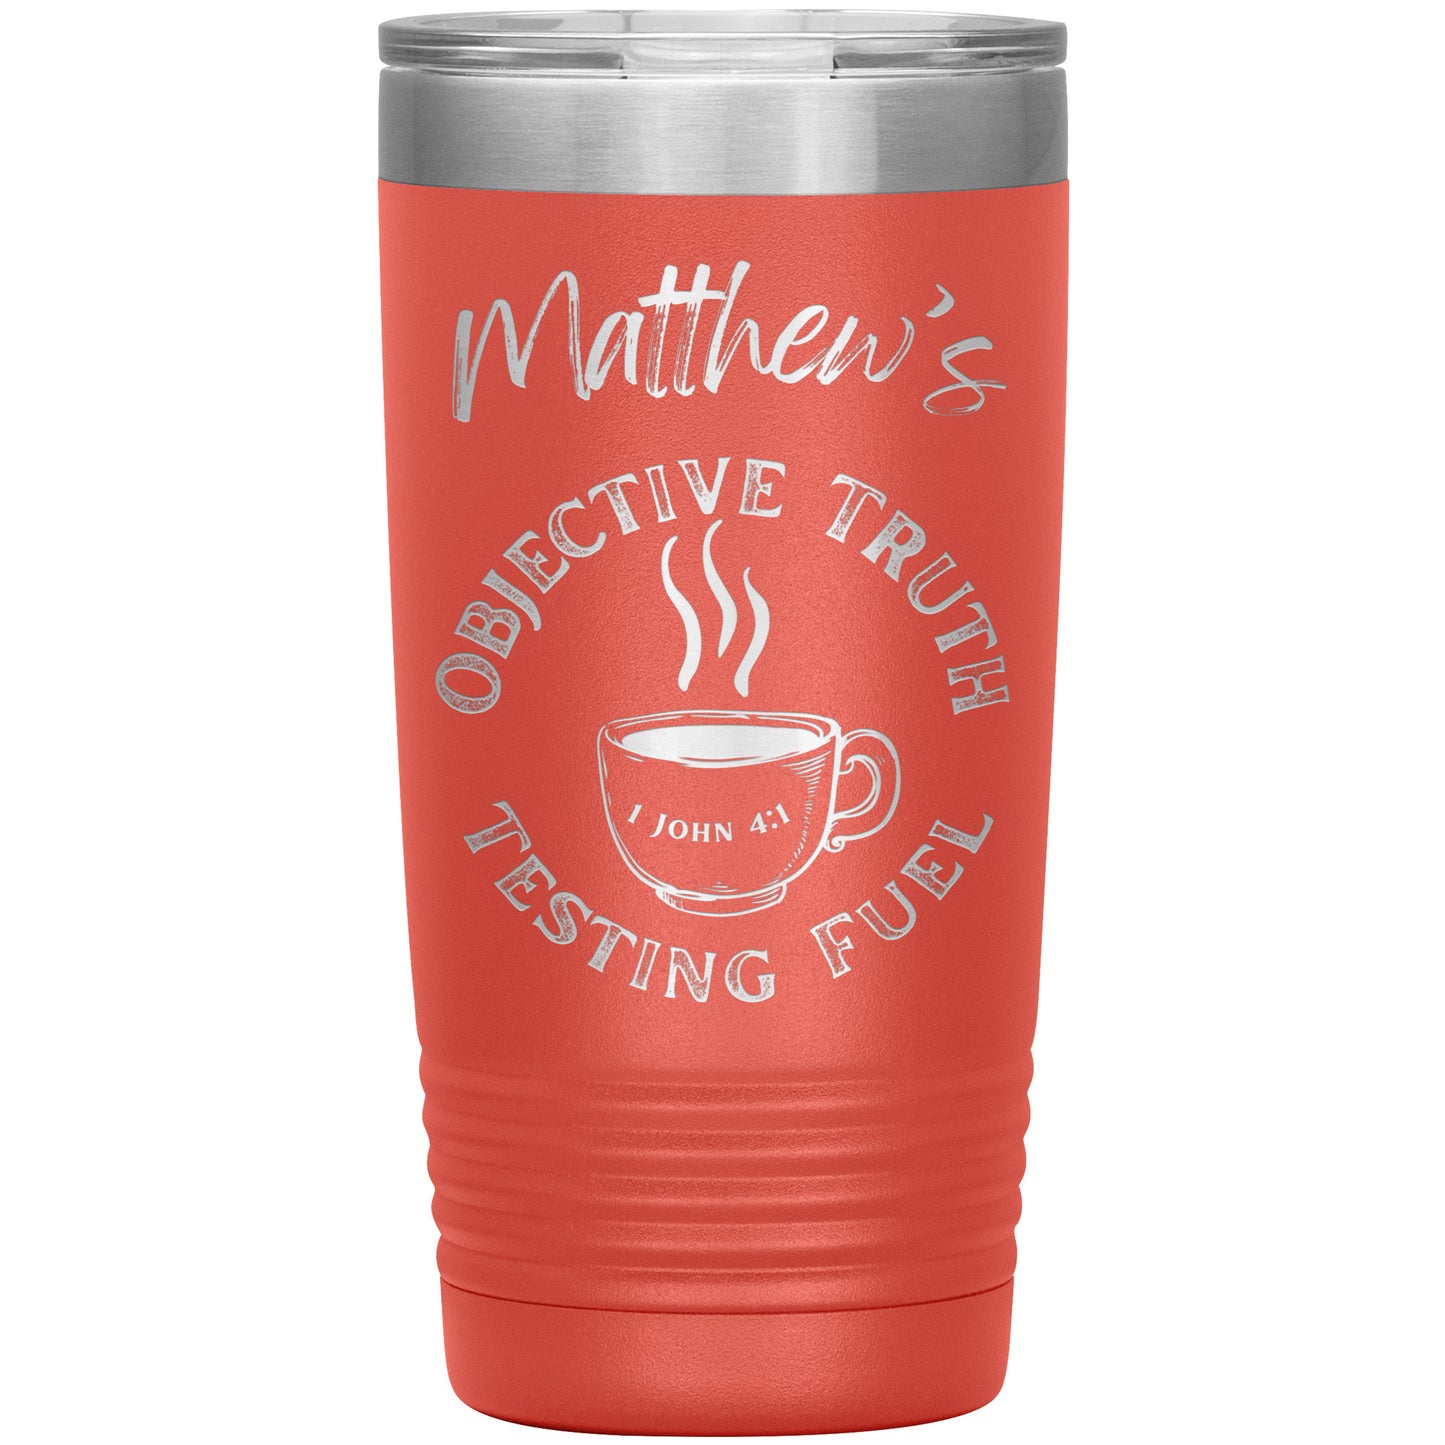 Objective Truth Testing Fuel Tumbler 20oz